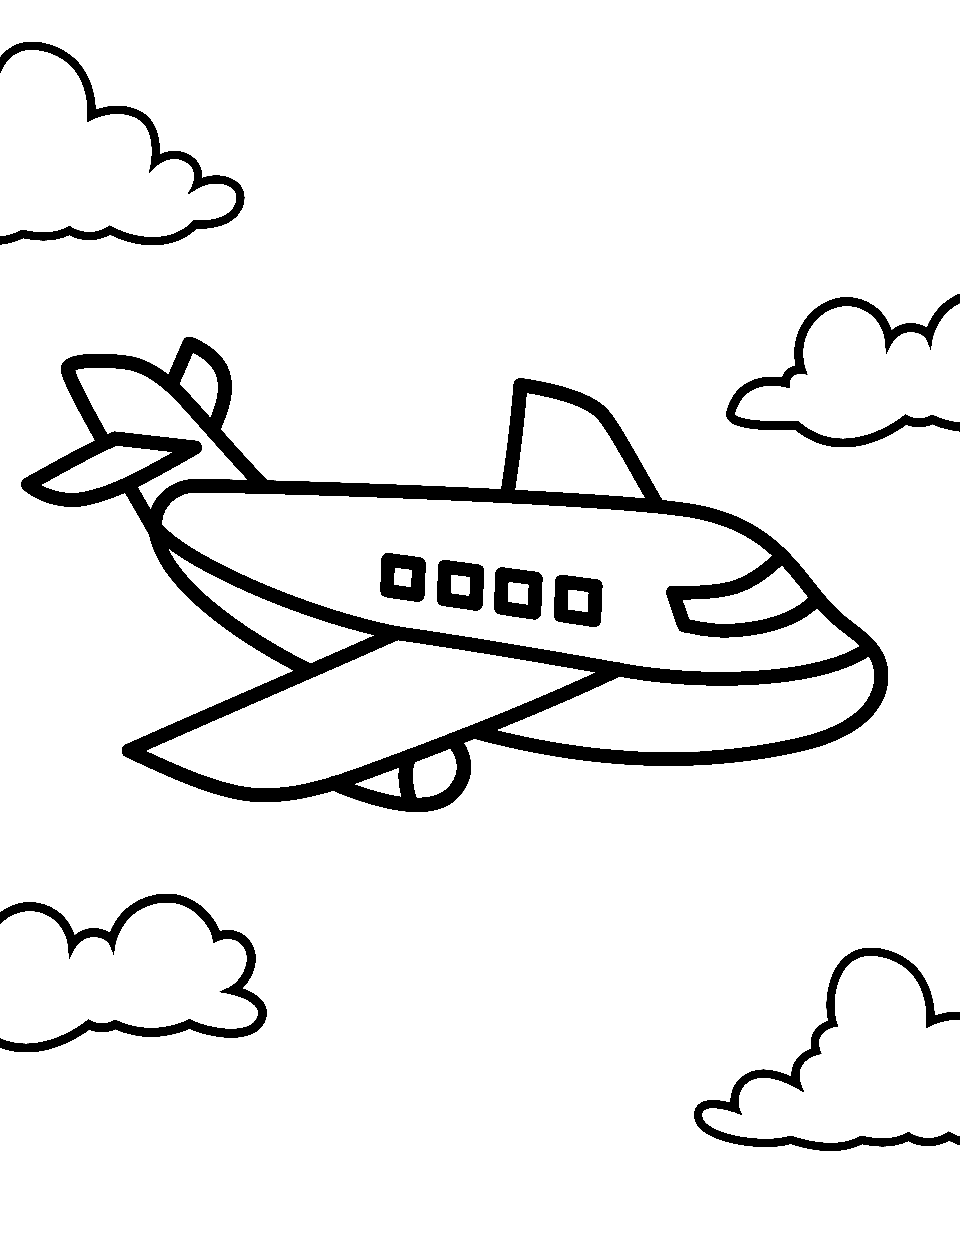 Friendly Aeroplane Adventure Airplane Coloring Page - A cartoonish preschool-friendly aeroplane flying over clouds.